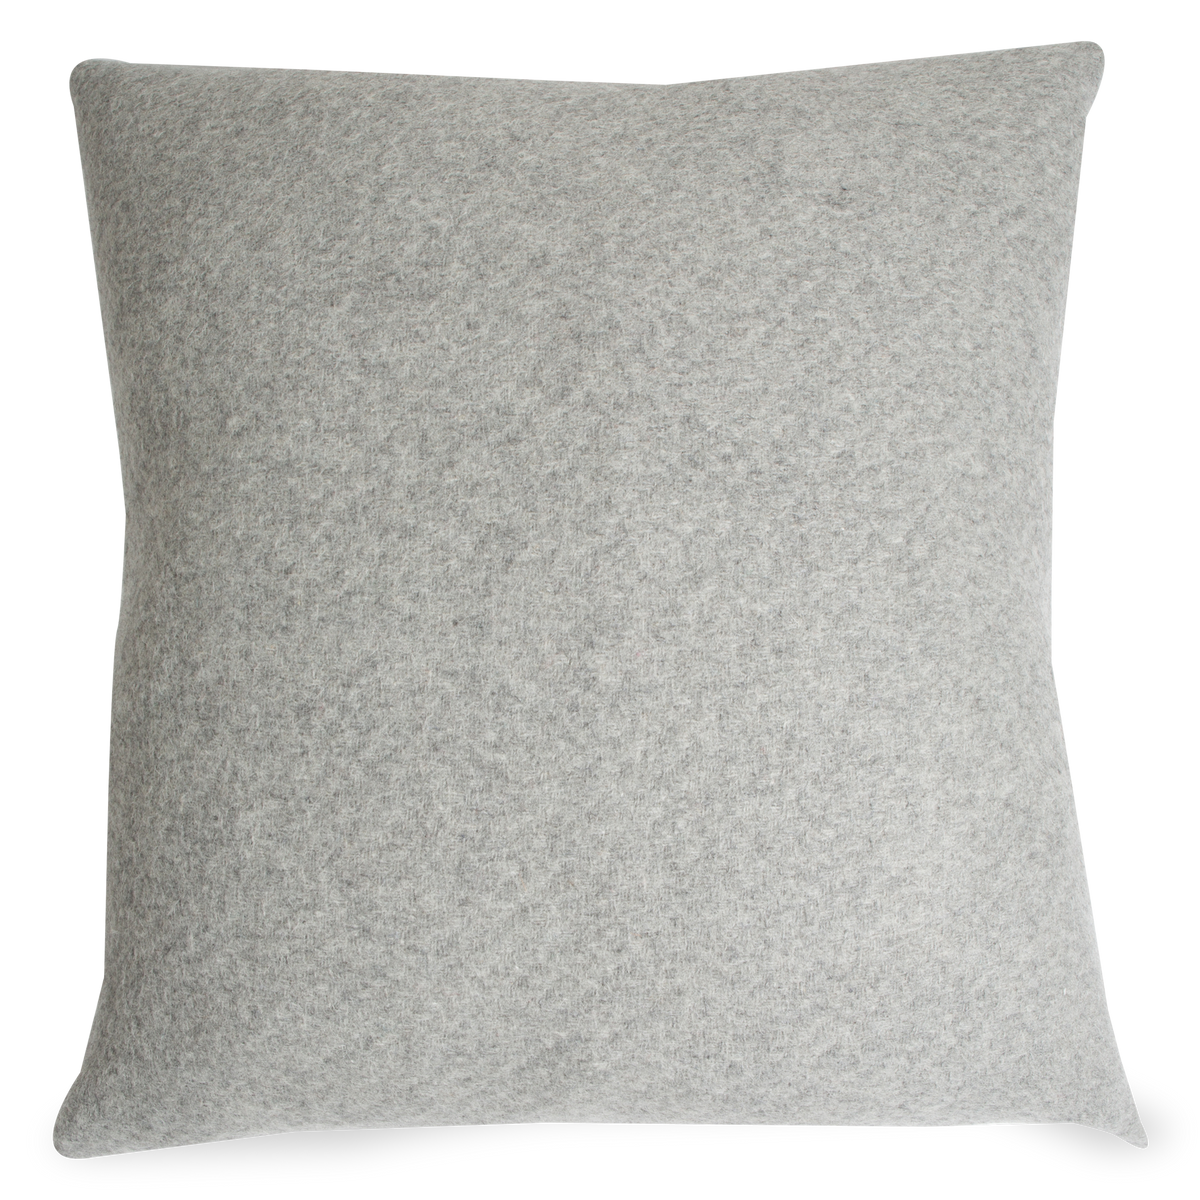 The Alpaca Lambswool Pillow is a classic design made from alpaca and lambswool fibres featuring a delicate texture in grey.